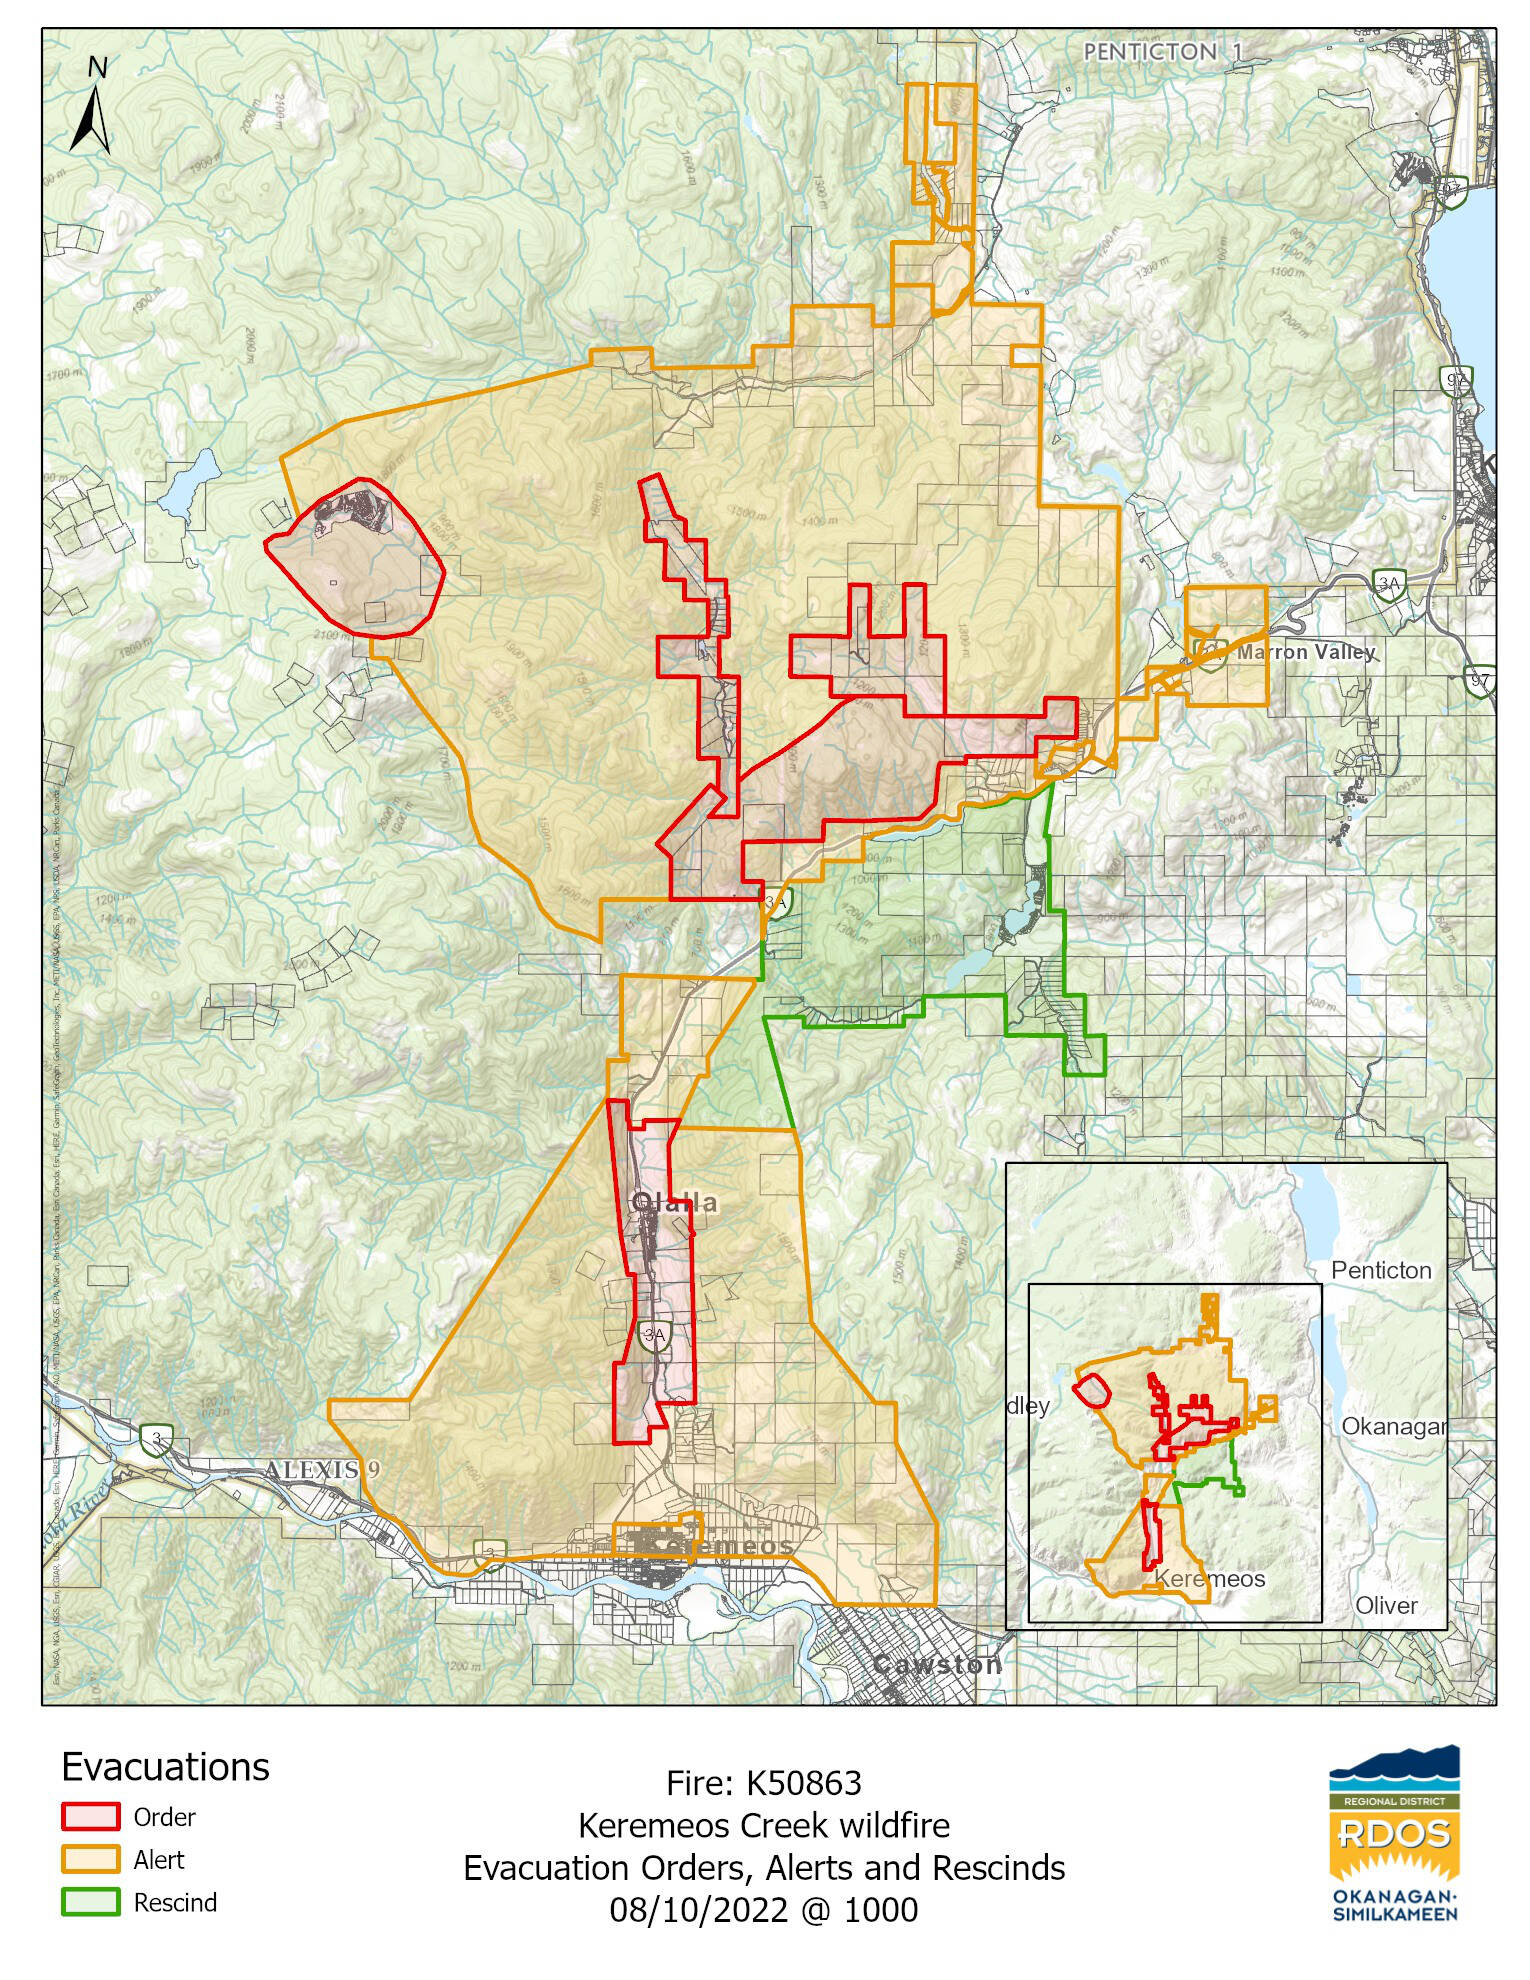 A RDOS map shows where evacuation orders and alerts have been rescinded.